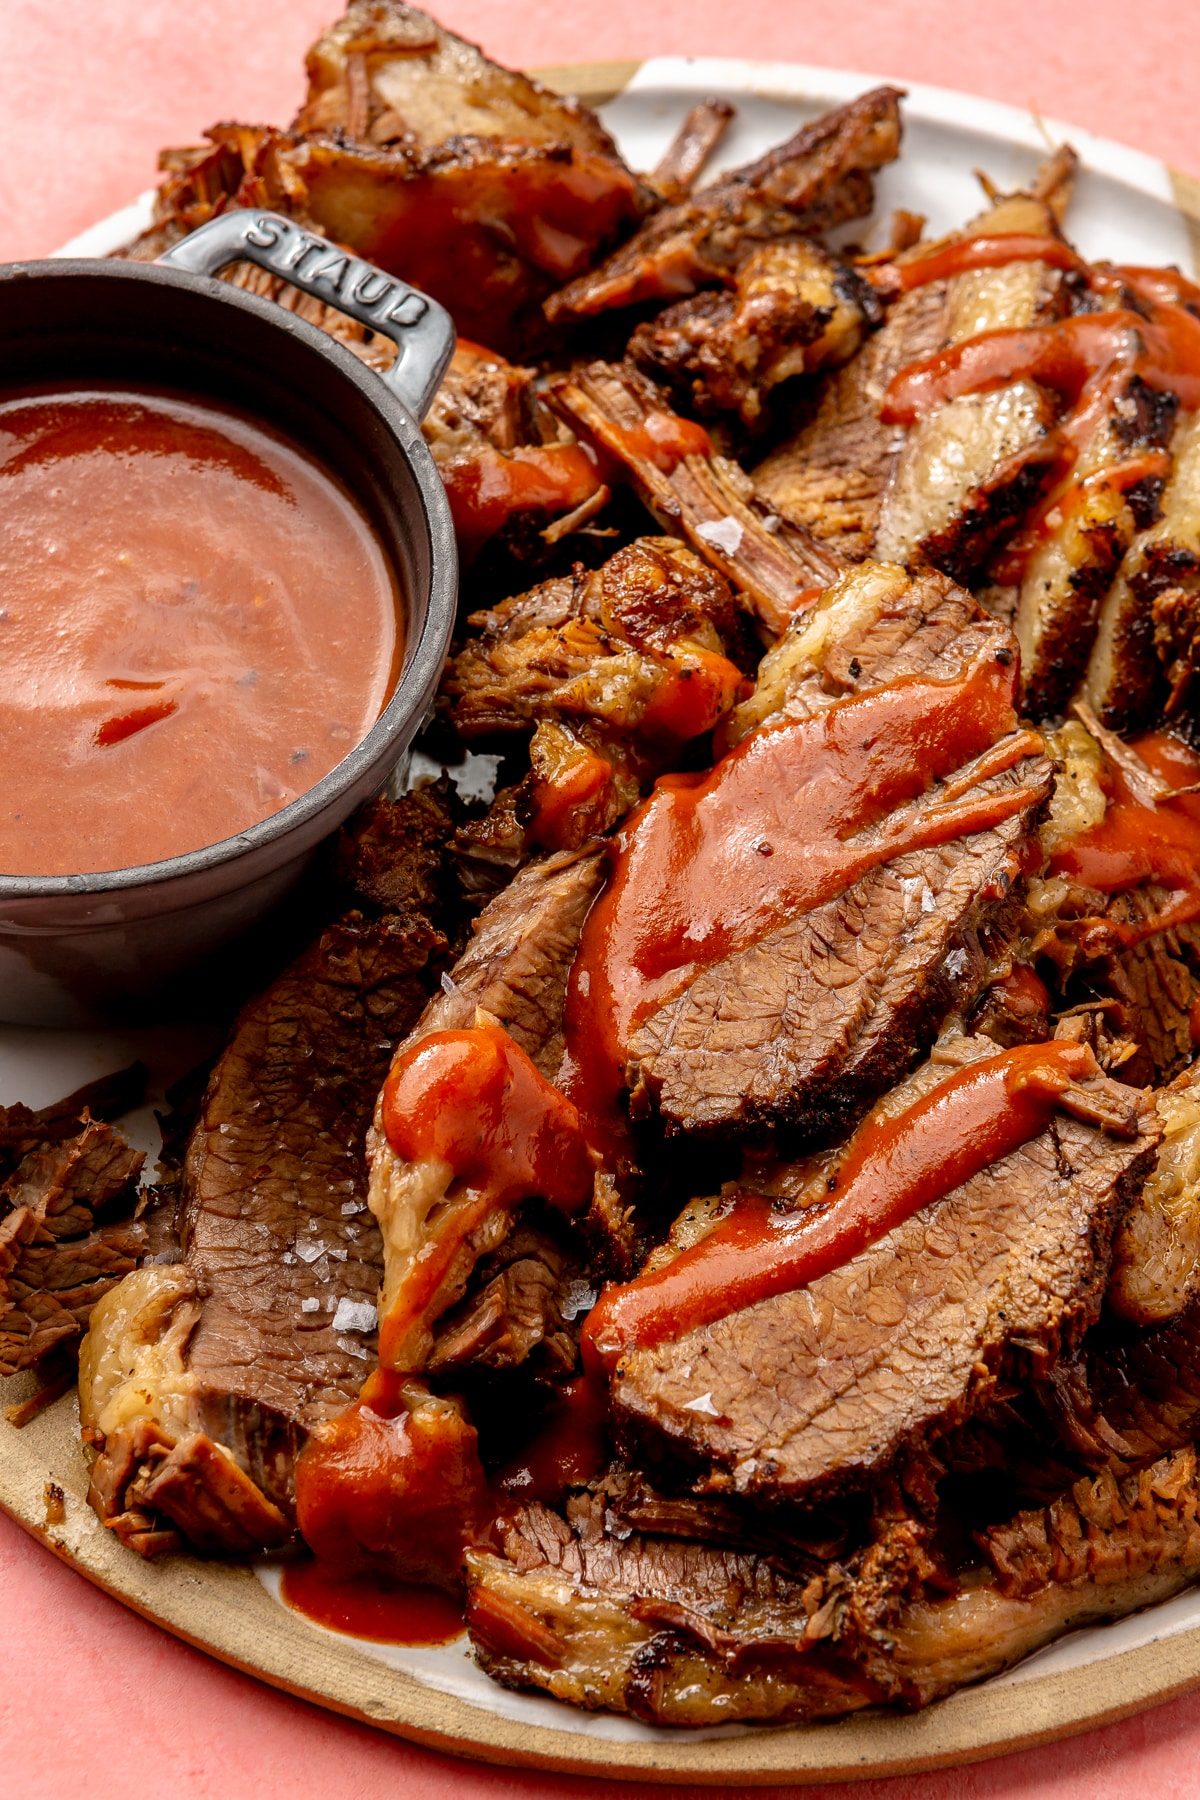 Sliced beef brisket sits on a brown plate. It has been drizzled with a red barbecue sauce. A bowl of sauce sits on the side.